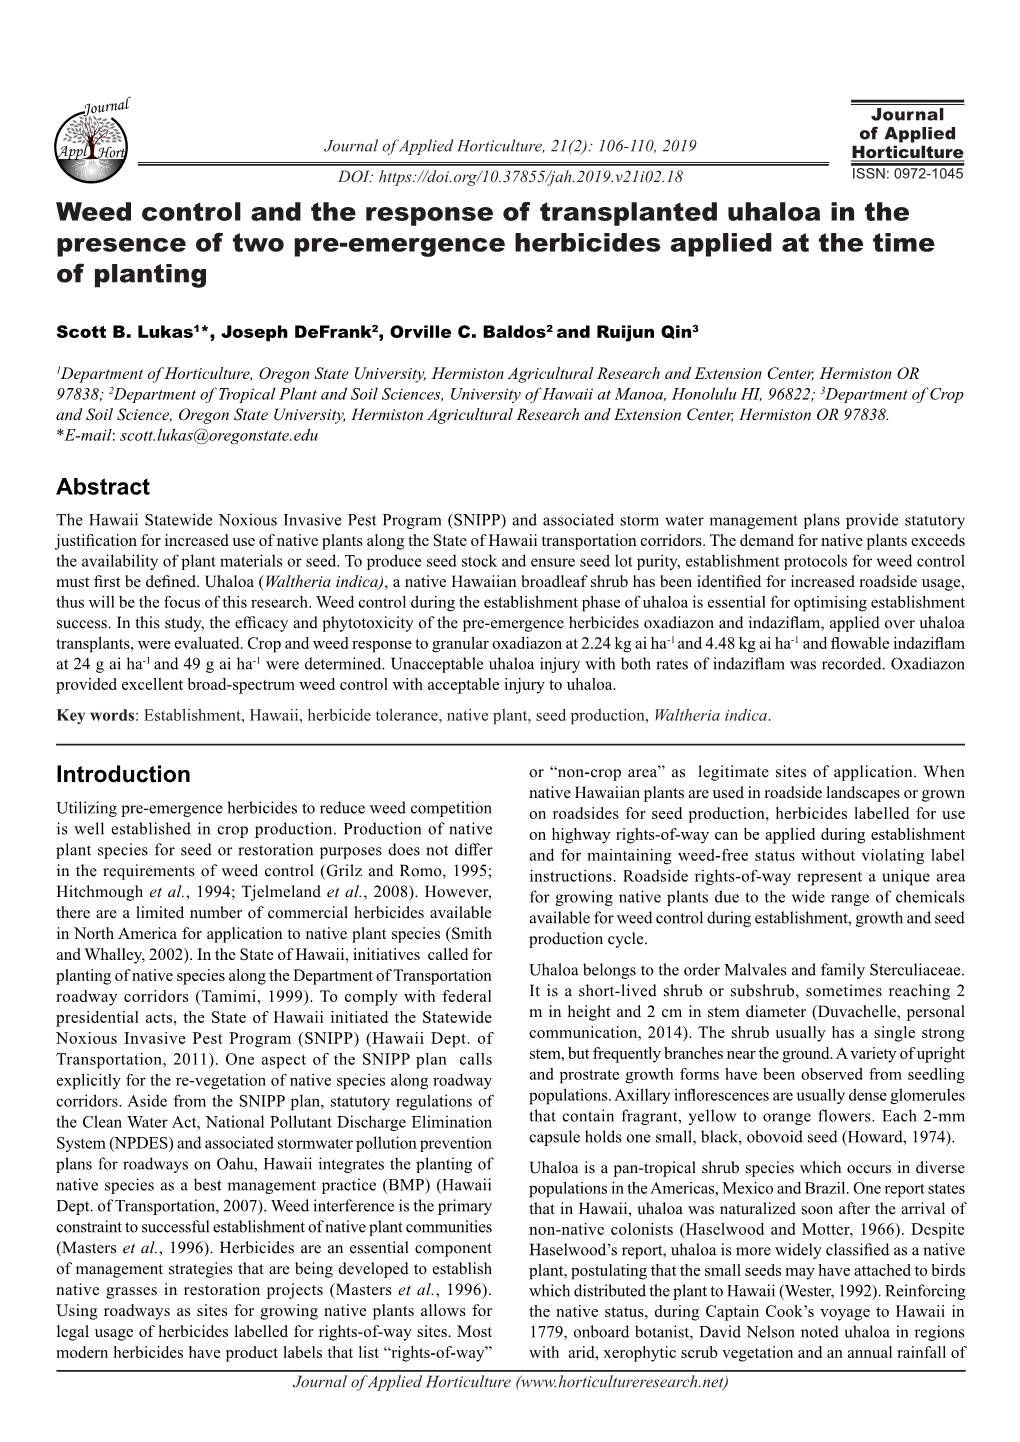 Weed Control and the Response of Transplanted Uhaloa in the Presence of Two Pre-Emergence Herbicides Applied at the Time of Planting